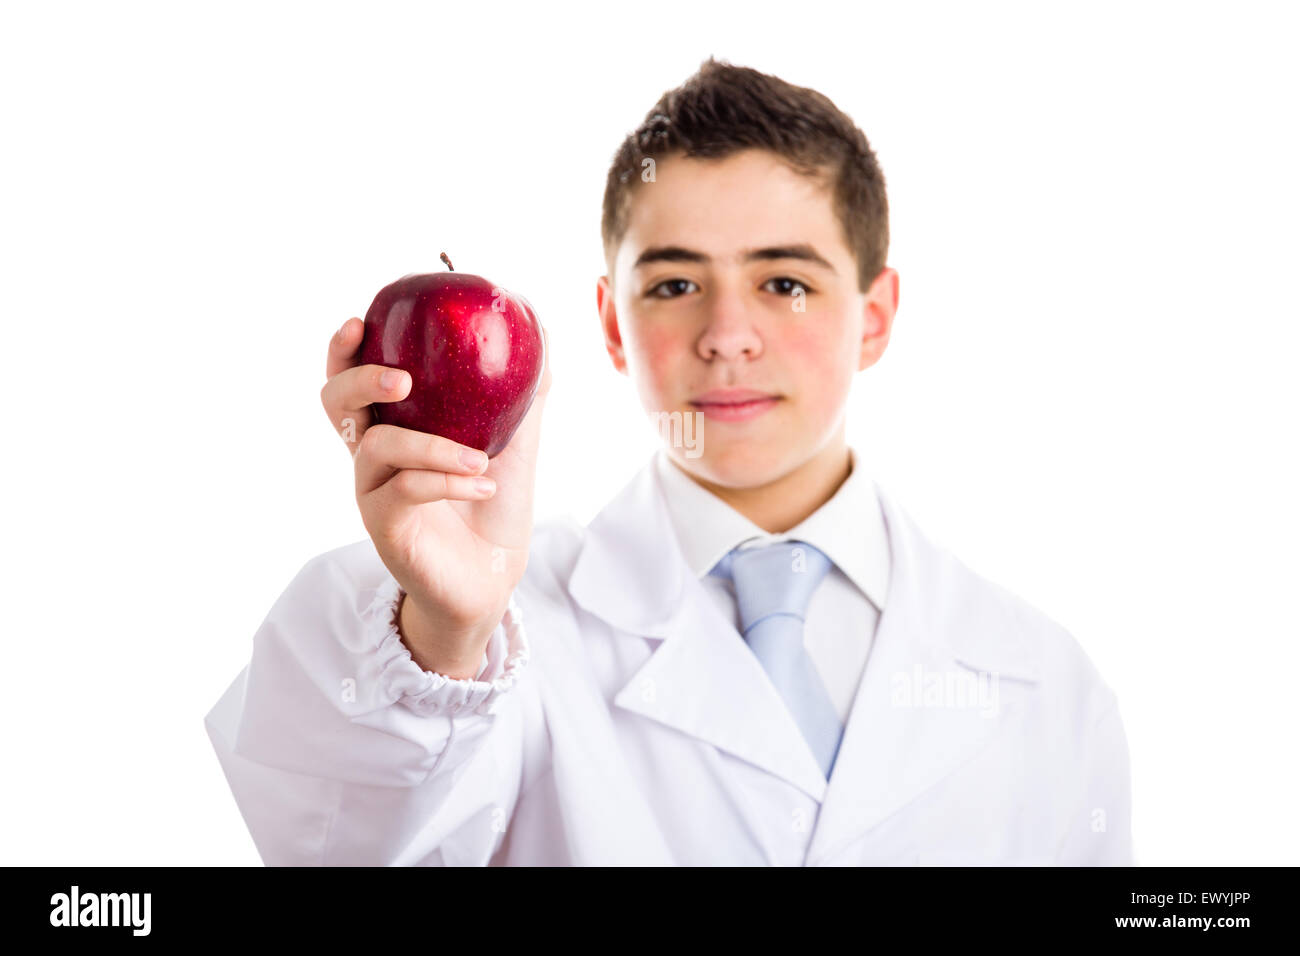 An acne skin child with medical white coat is showing a juicy and tasty red  apple reminding of old saying, An apple a day keeps the doctor away, meaning  the importance of